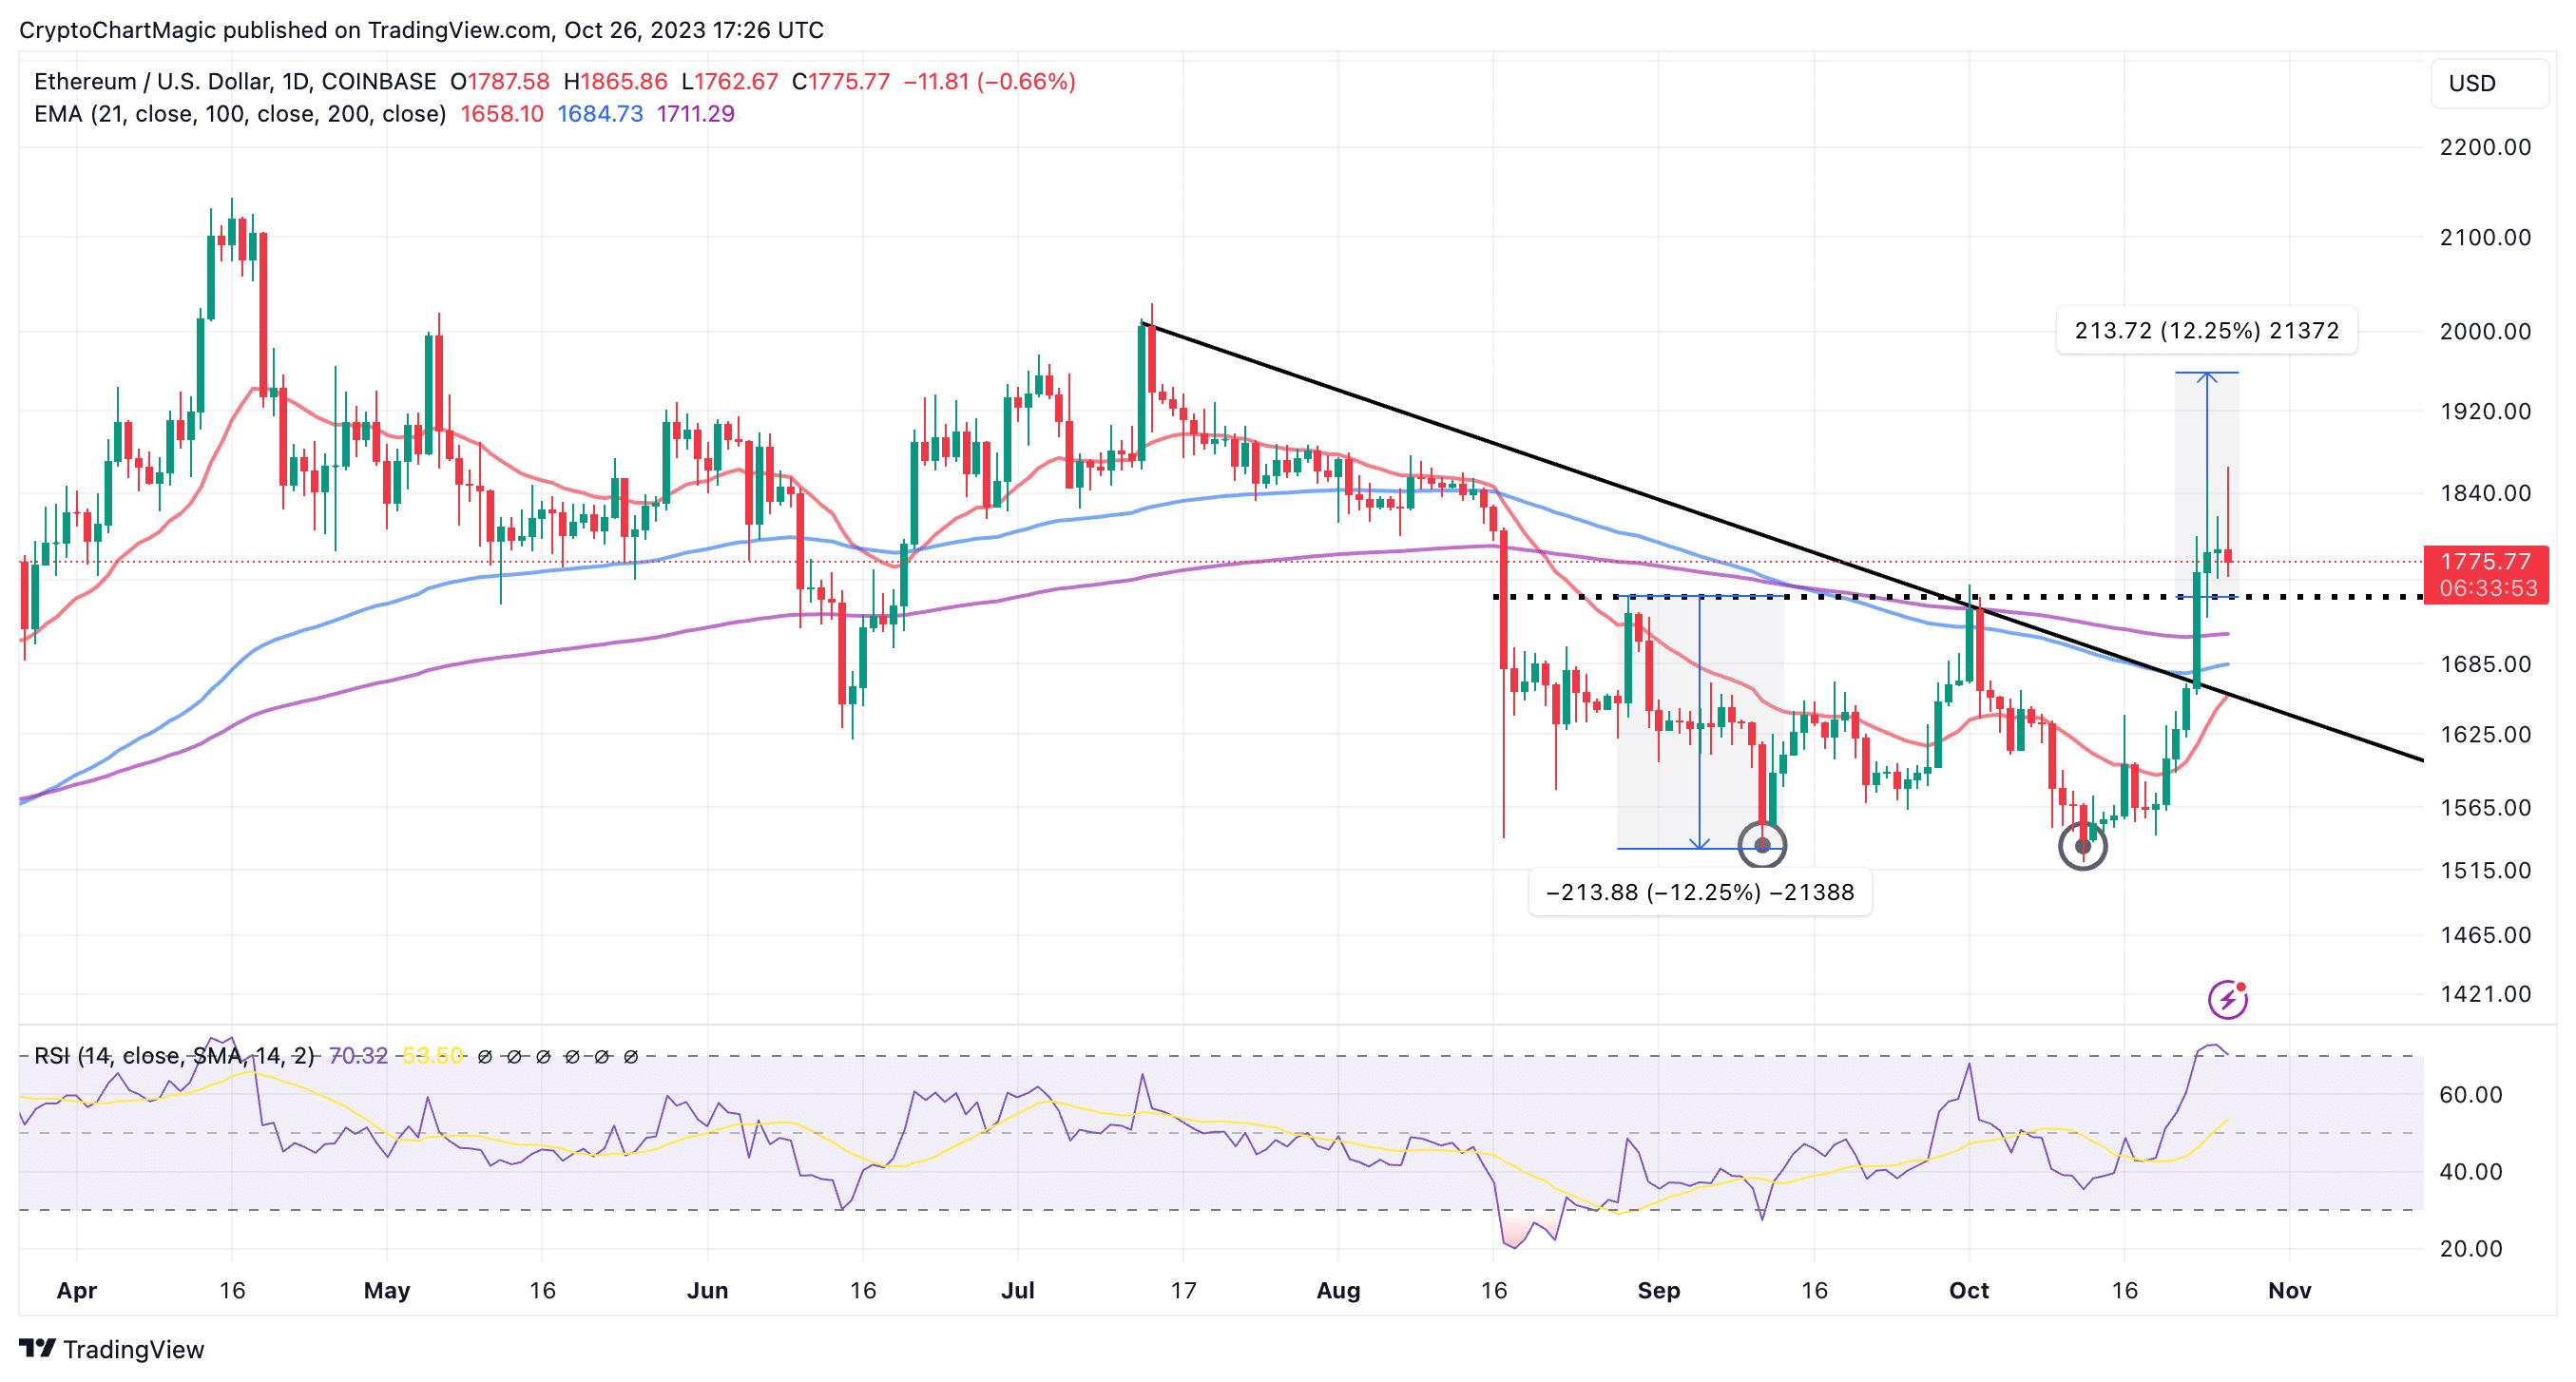 Ethereum (ETH) Price Prediction for Tommorow, Month, Year